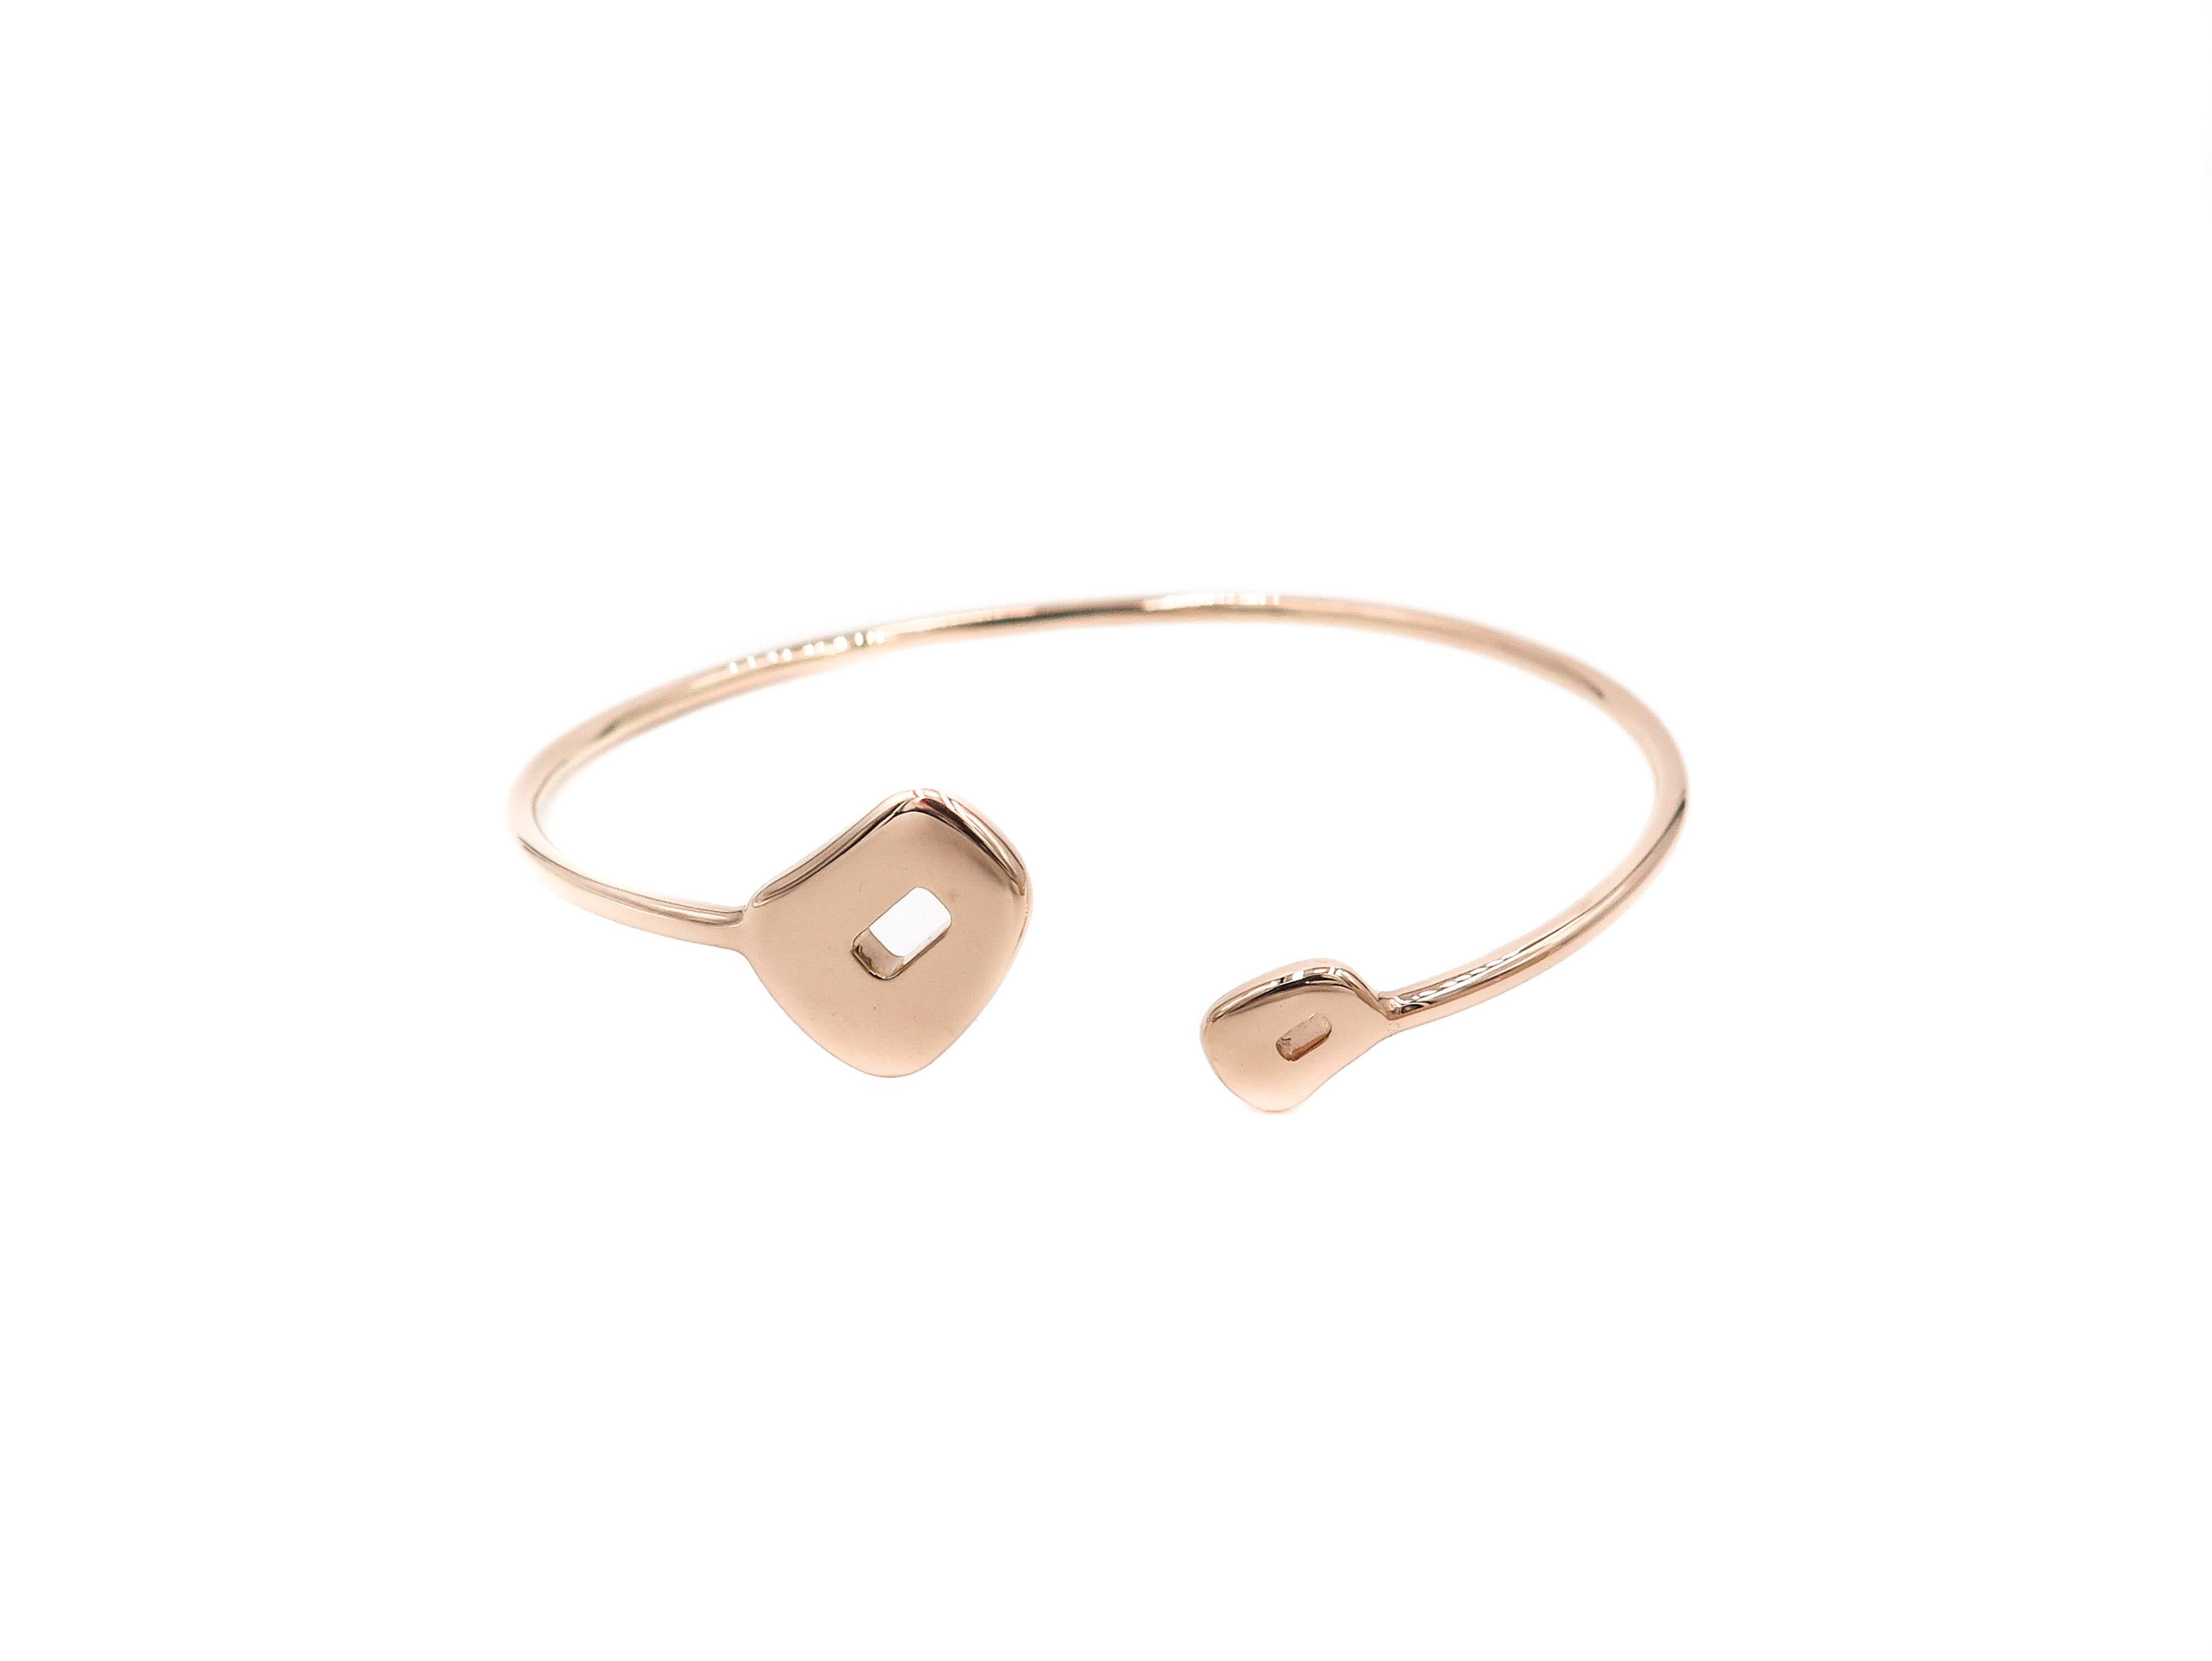 Smoothed angles and attractive irregular shapes for easy wear. 
This Puzzle bangle bracelet is also at the very top for innovation in design, materials and fun.
Handcrafted in Italy by Mattioli in 18k rose gold.
